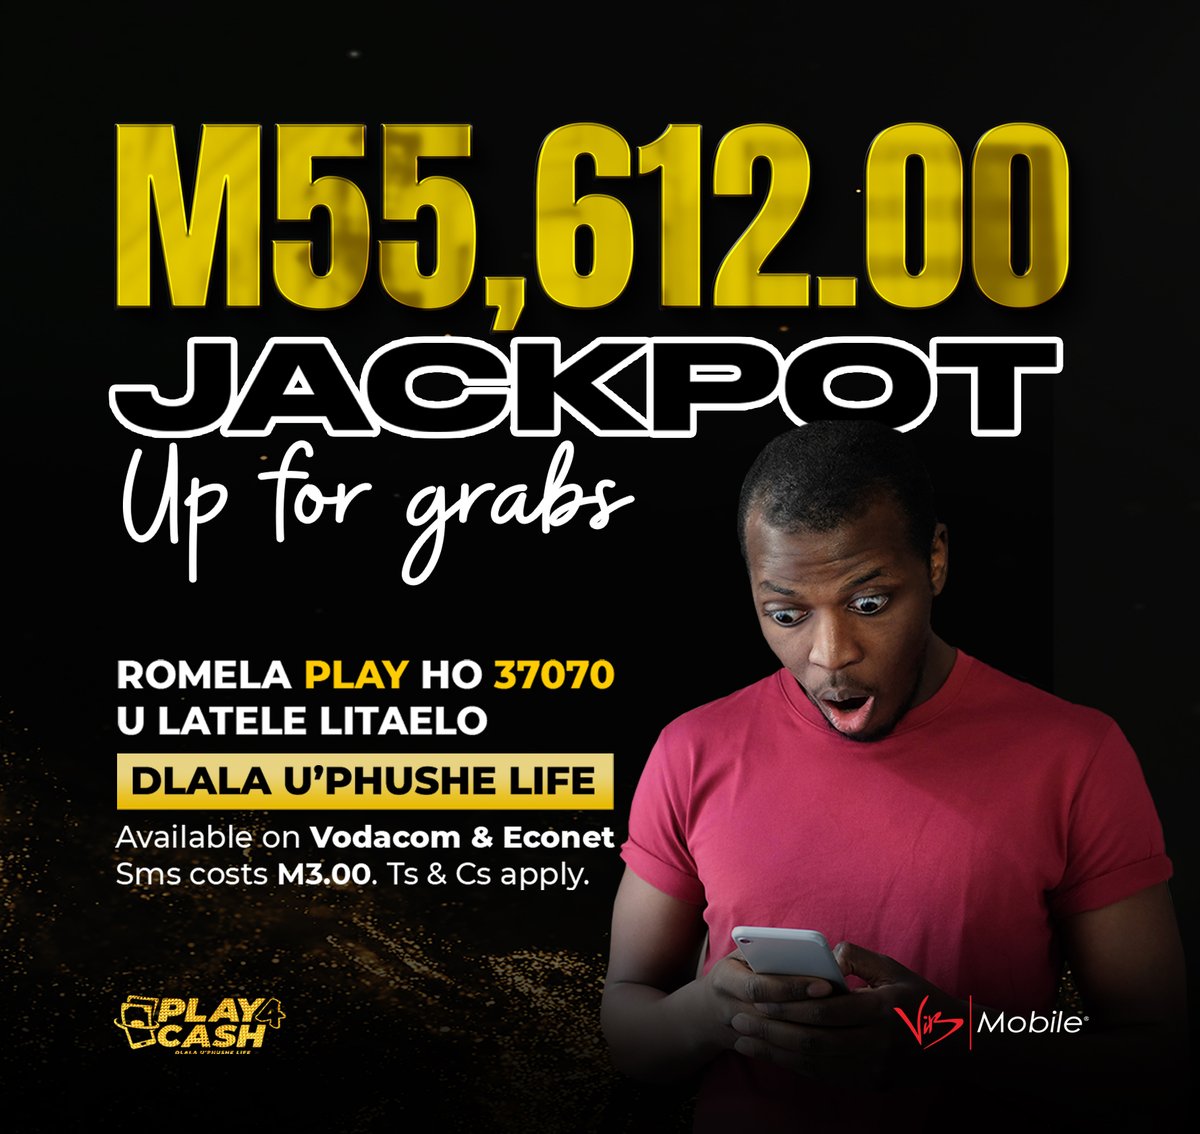 Play4Cash 🤑JACKPOT 🤑 is at M55 612 this week!
Make sure YOU are the first to take it the JACKPOT  home!! 💰
Sms PLAY to 37070 & follow the prompts. Sms costs M3.00. Ts & Cs apply. 
#play4cash #dlalauphushelife